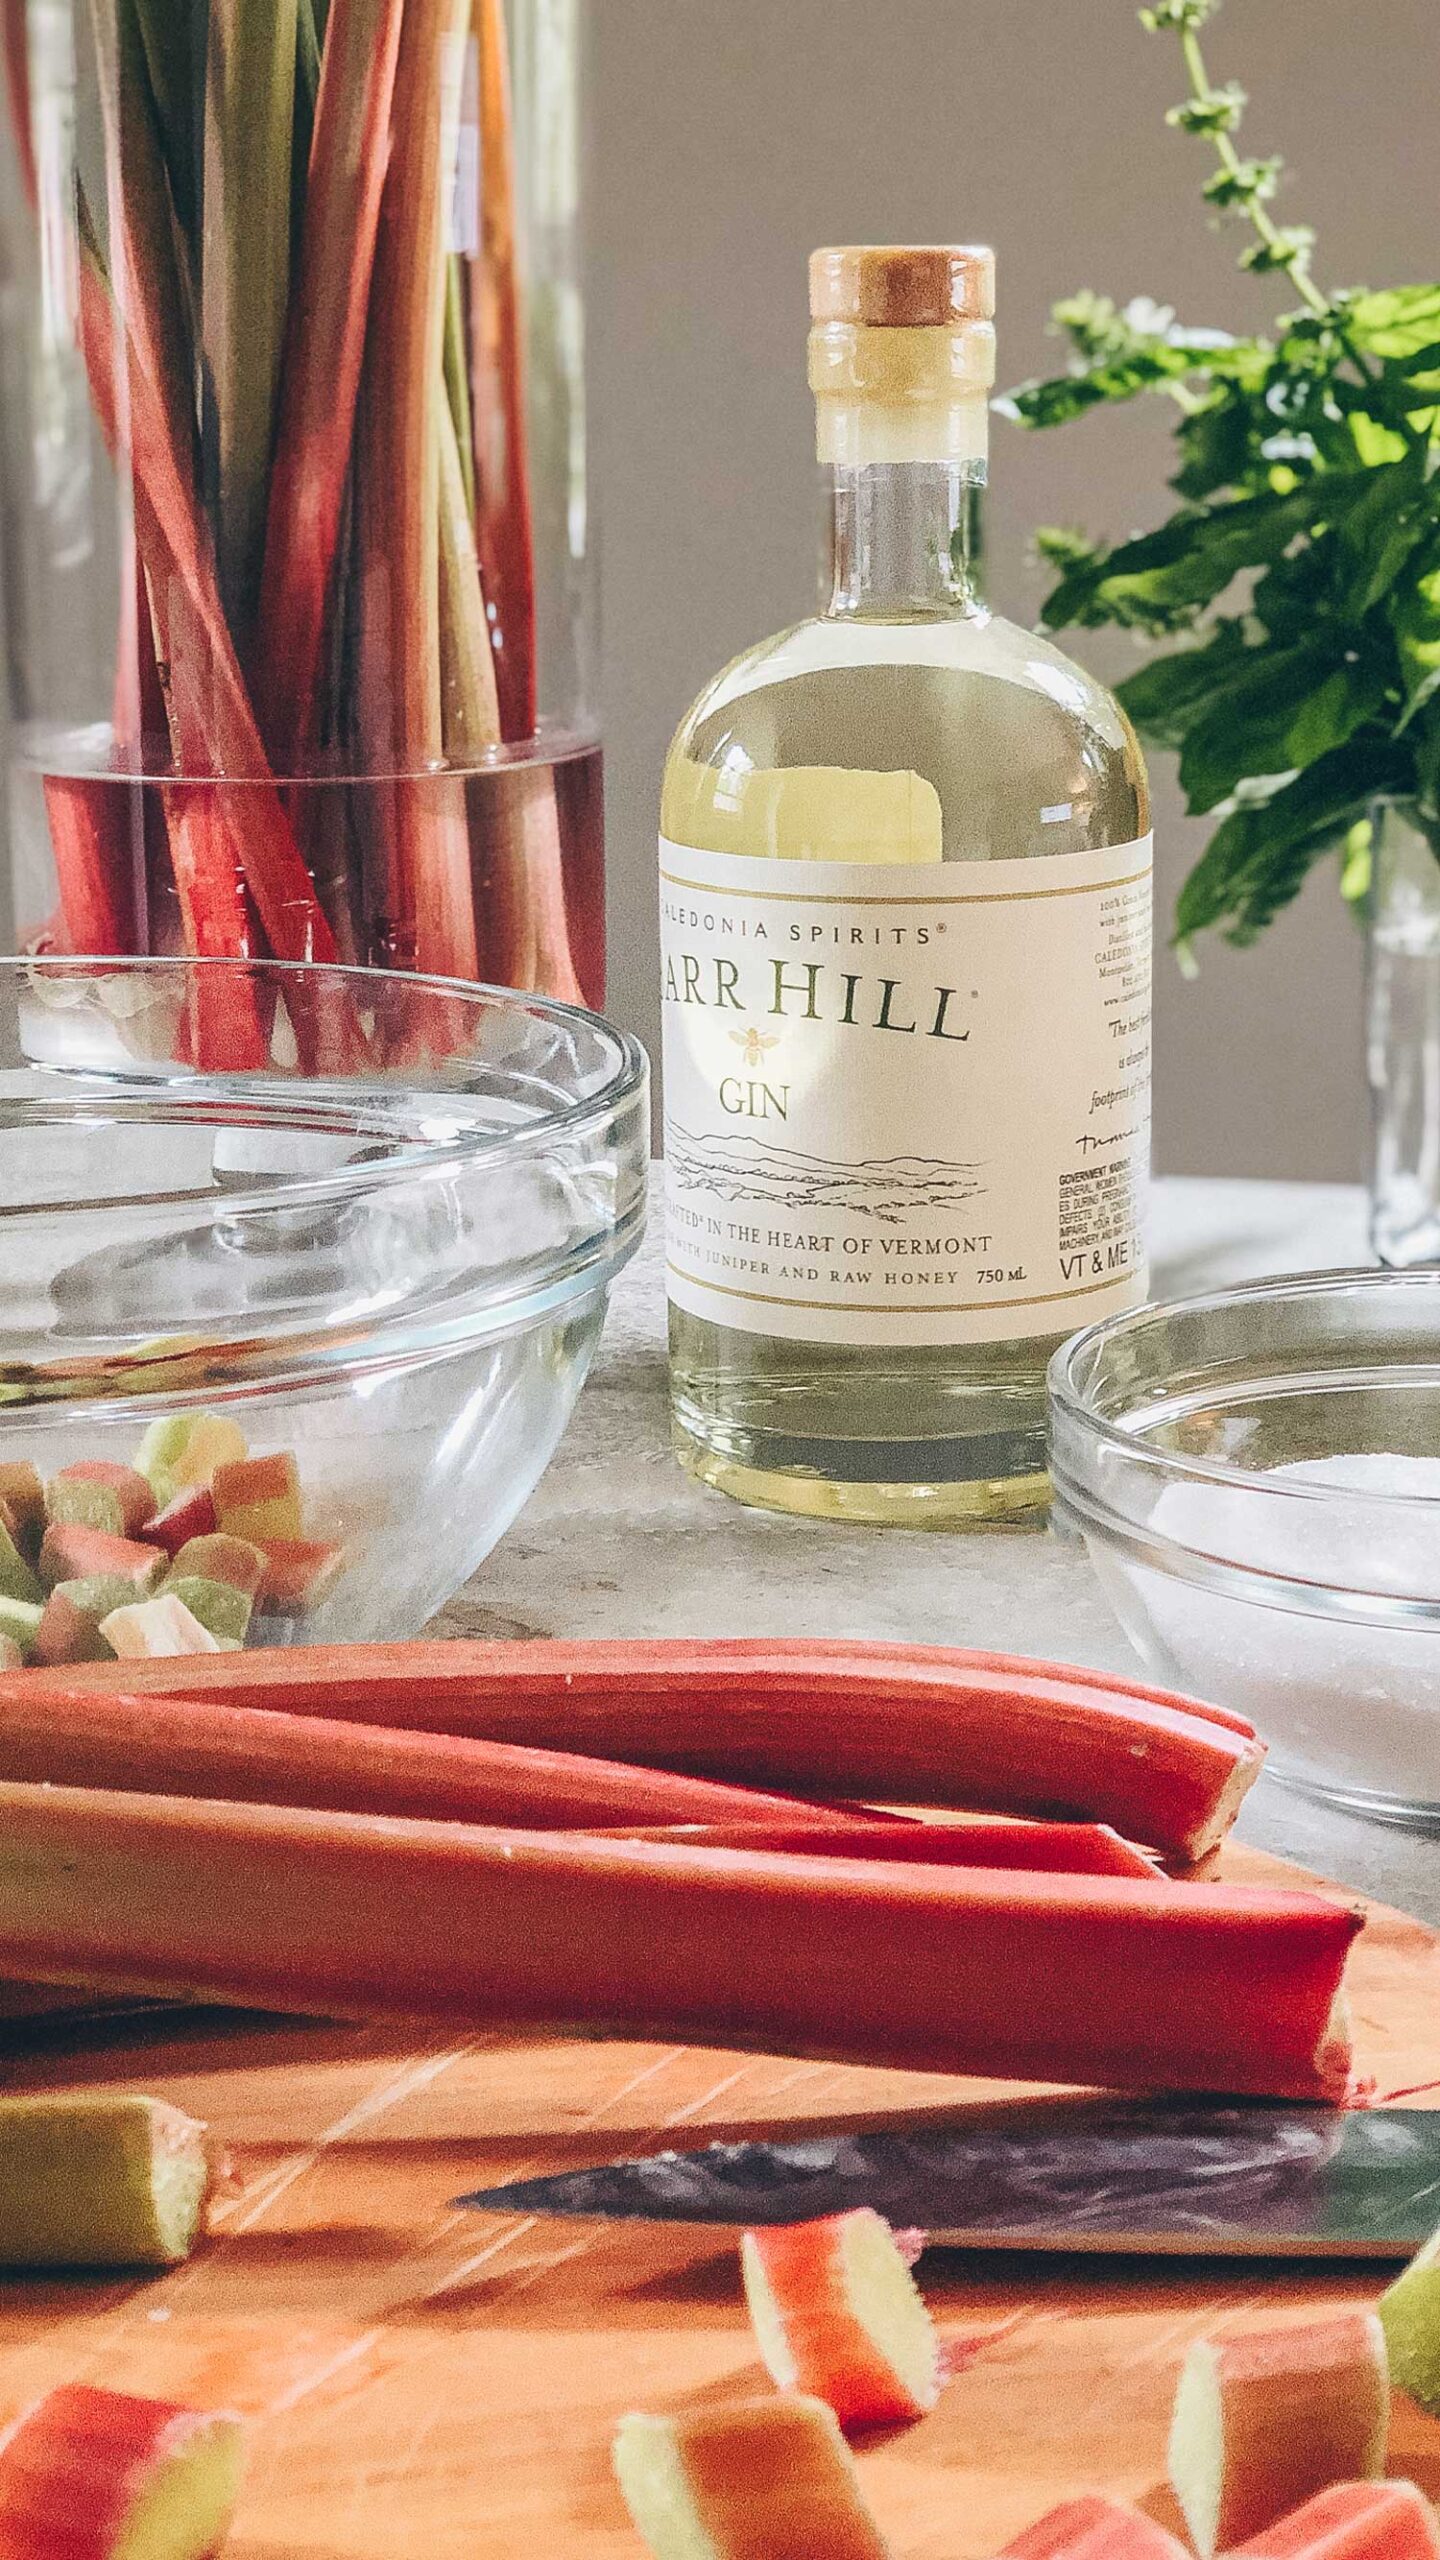 A bottle of Barr Hill Gin on a table with recipe ingredients to make Rhubarb Gin: fresh, rhubarb, sugar, and gin.